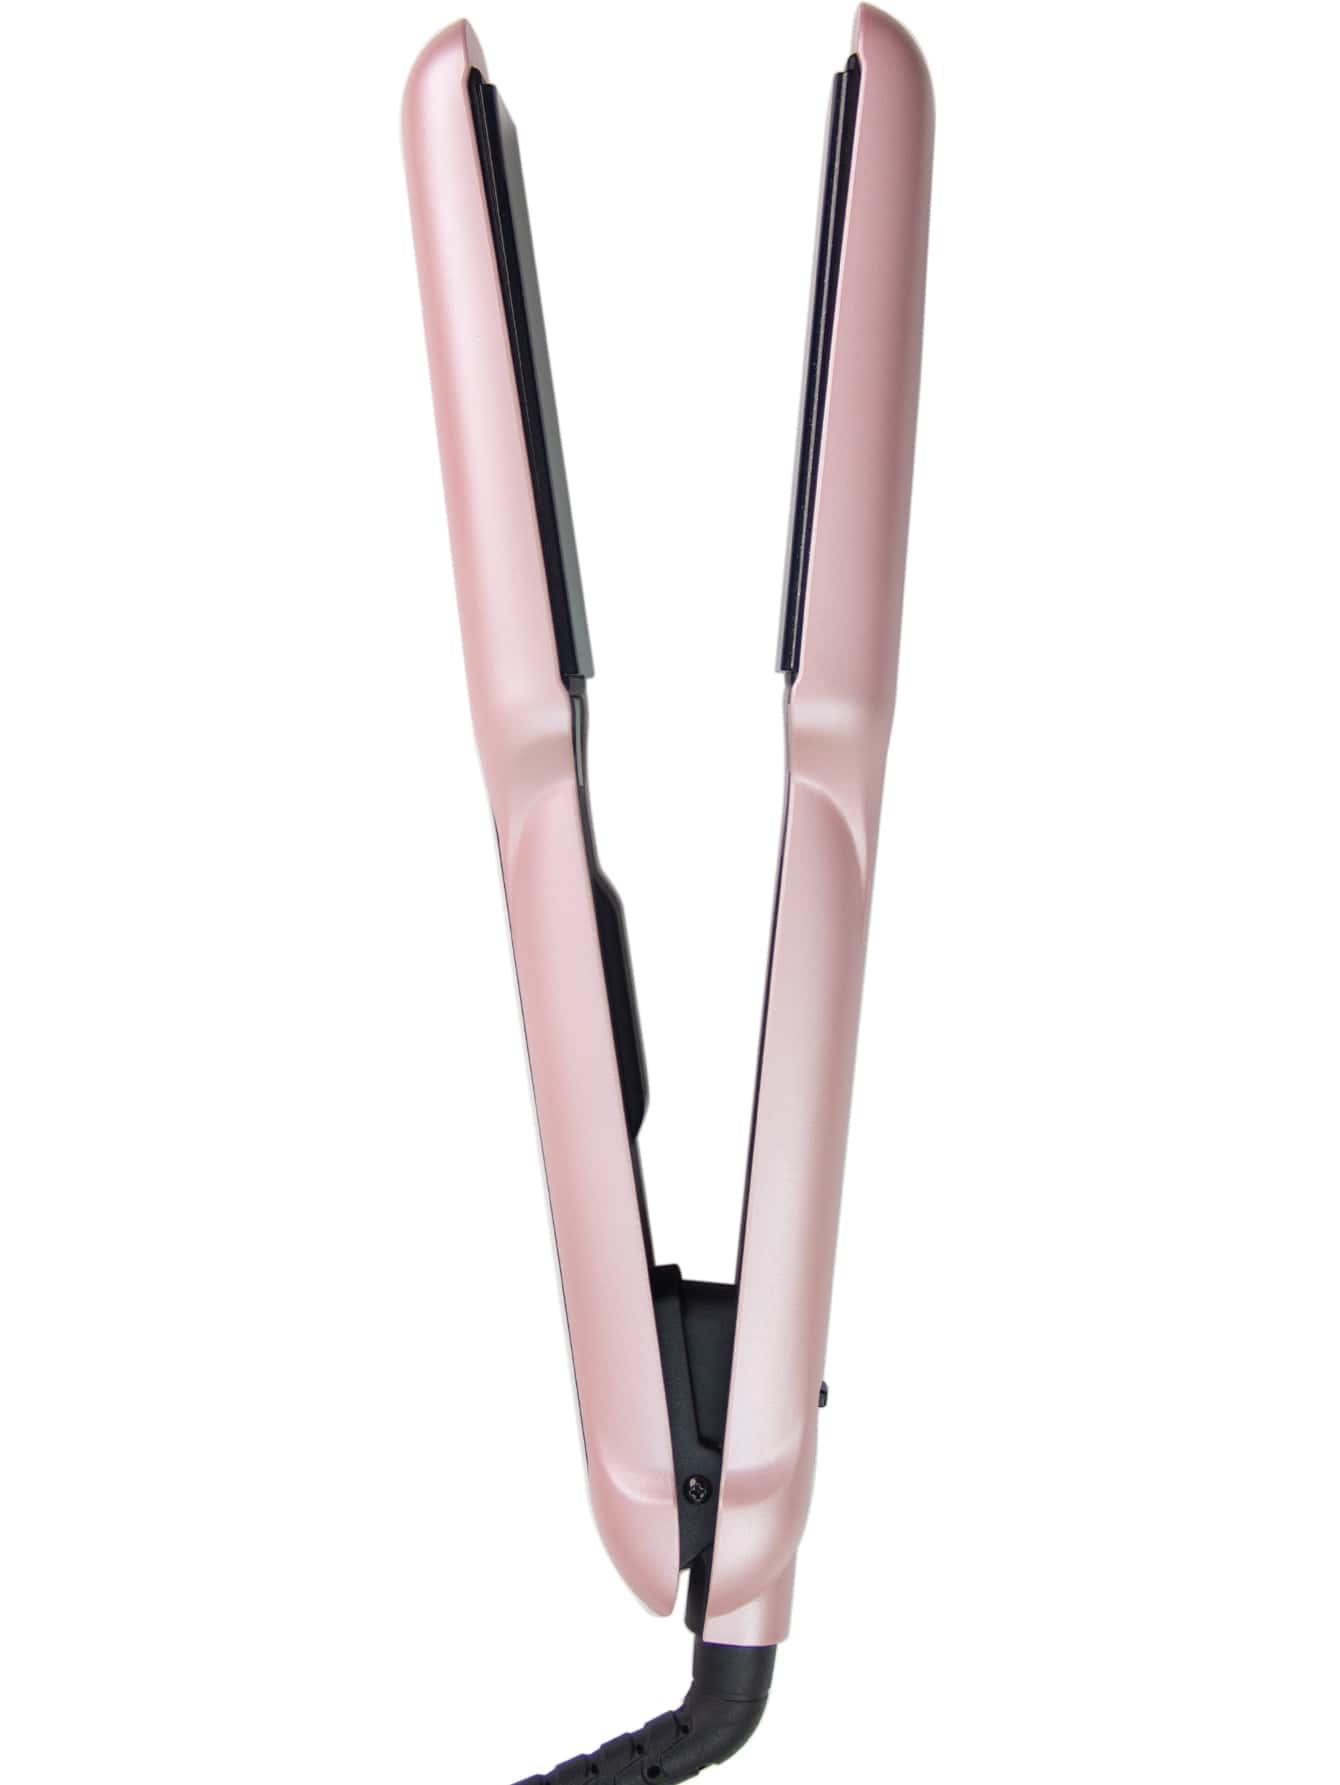 (US)ANGENIL Argan Oil Flat Iron Curling Iron in One, Professional Portable Dual Voltage Ceramic Hair Straightener, 1.6 Inch Wide Flat Iron for Thick Hair, Fast Straightening Styling, LCD Display-Pink-2